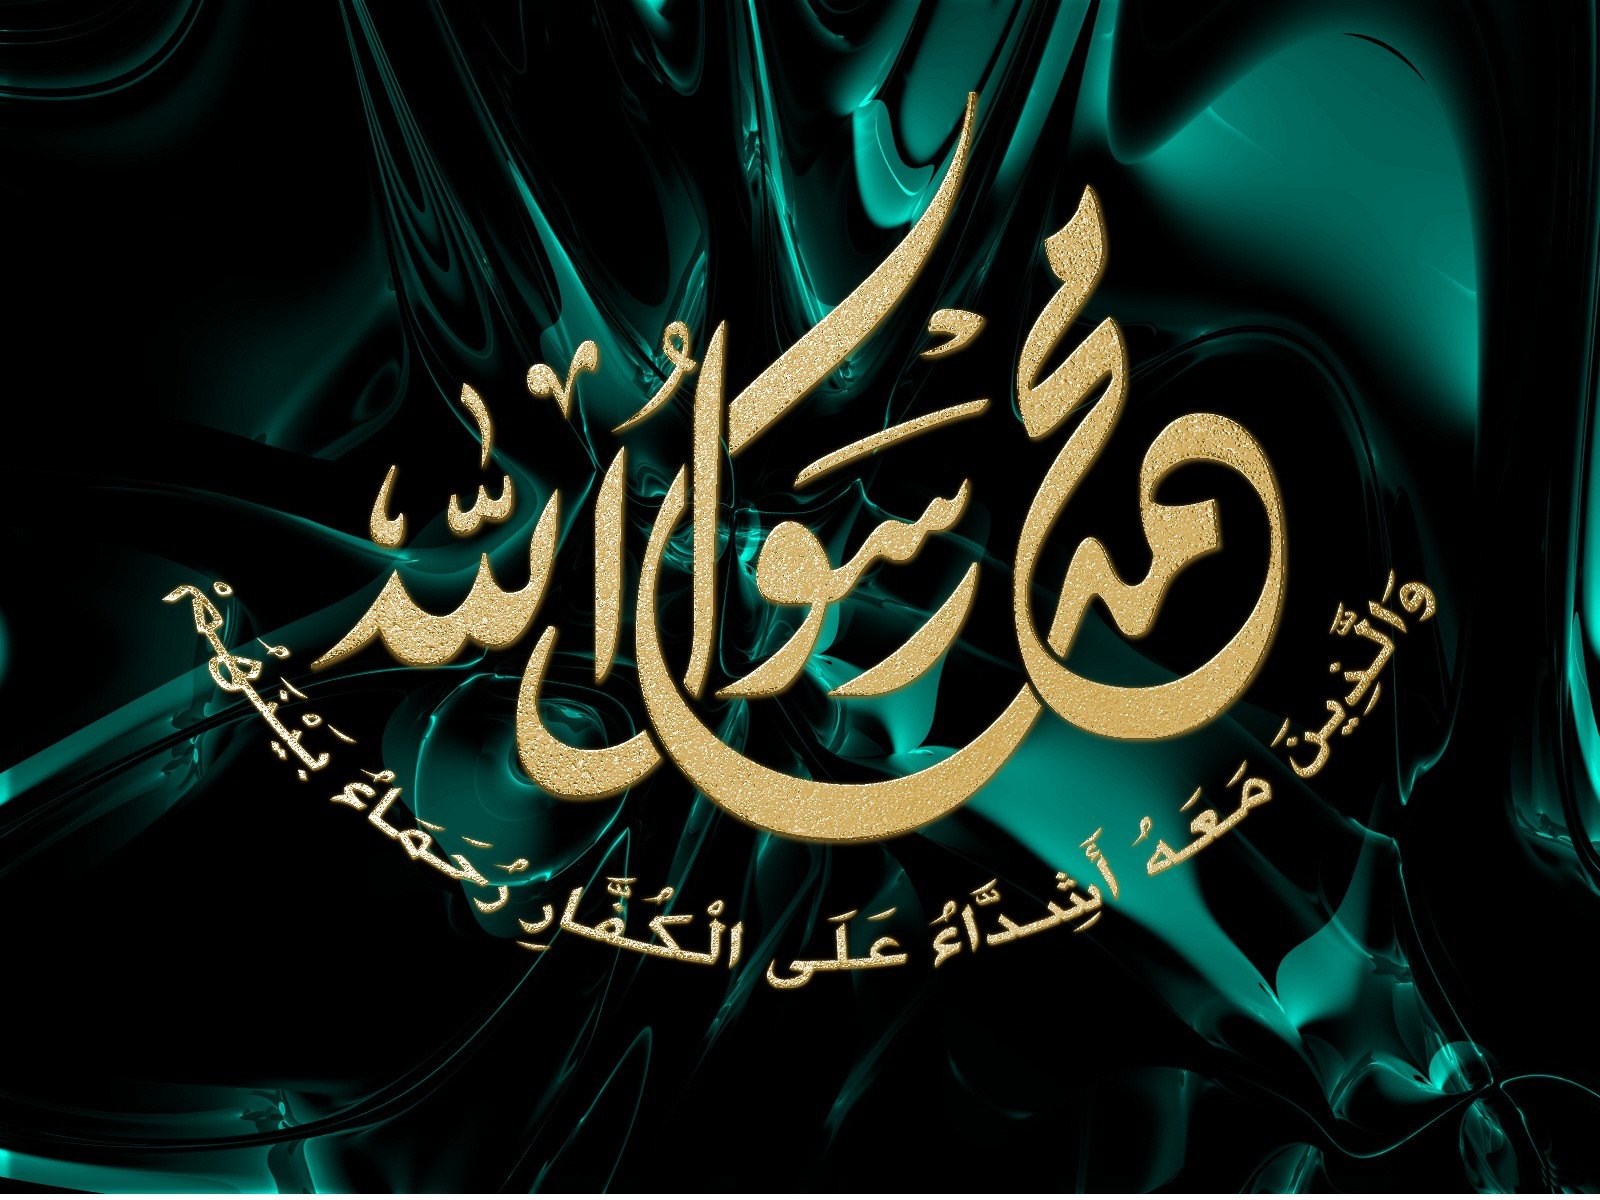 islam, Almoselly, Verse, Calligraphy, Religious Wallpaper